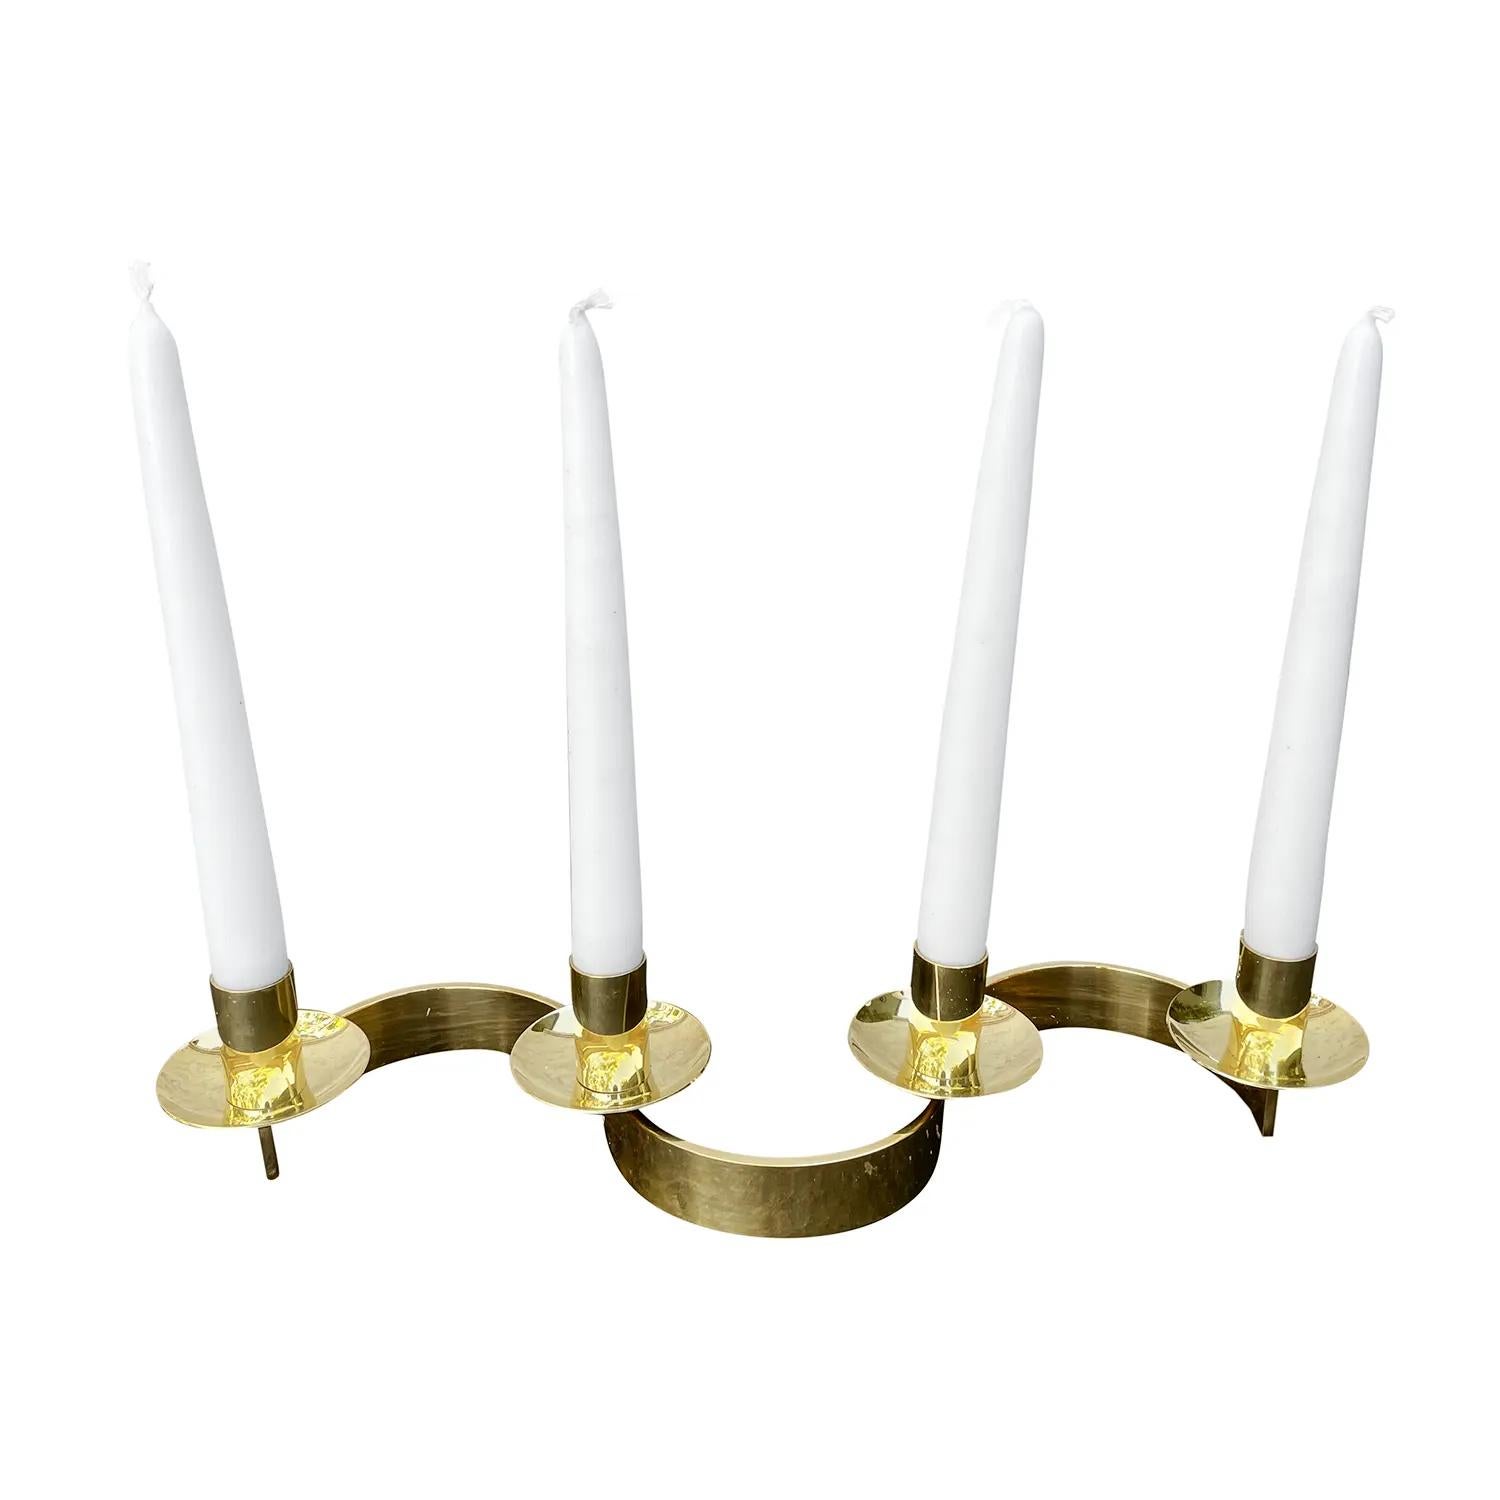 A gold, vintage Mid-Century Modern Swedish Slingan, candle holder made of handcrafted polished brass, designed by Josef Frank and produced by Svenskt Tenn in good condition. Each of the candlesticks of the Scandinavian holder is supported by a